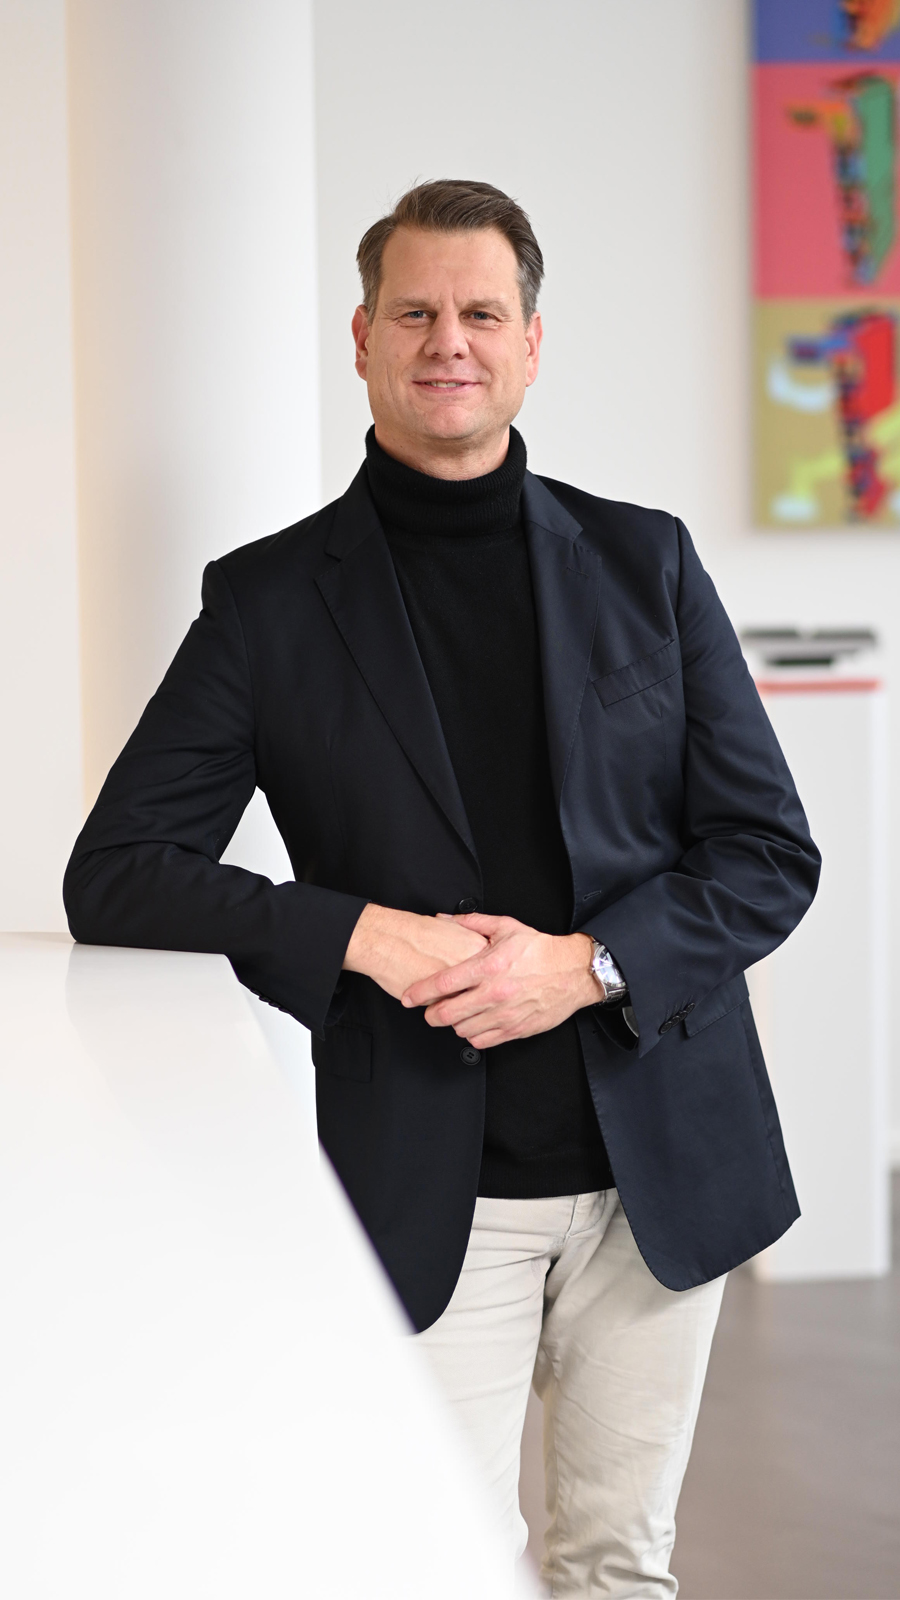 Jörg Rottkord, Branchenmanager Automobilindustrie, Beckhoff Automation